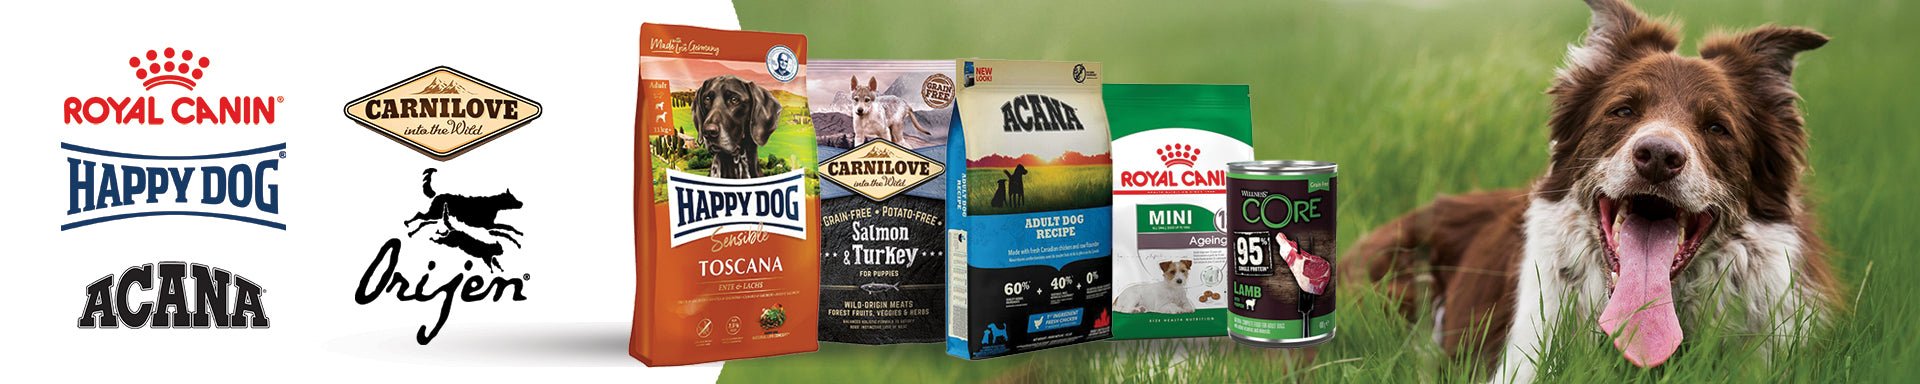 ADULT DRY DOG FOOD - The Pets Club